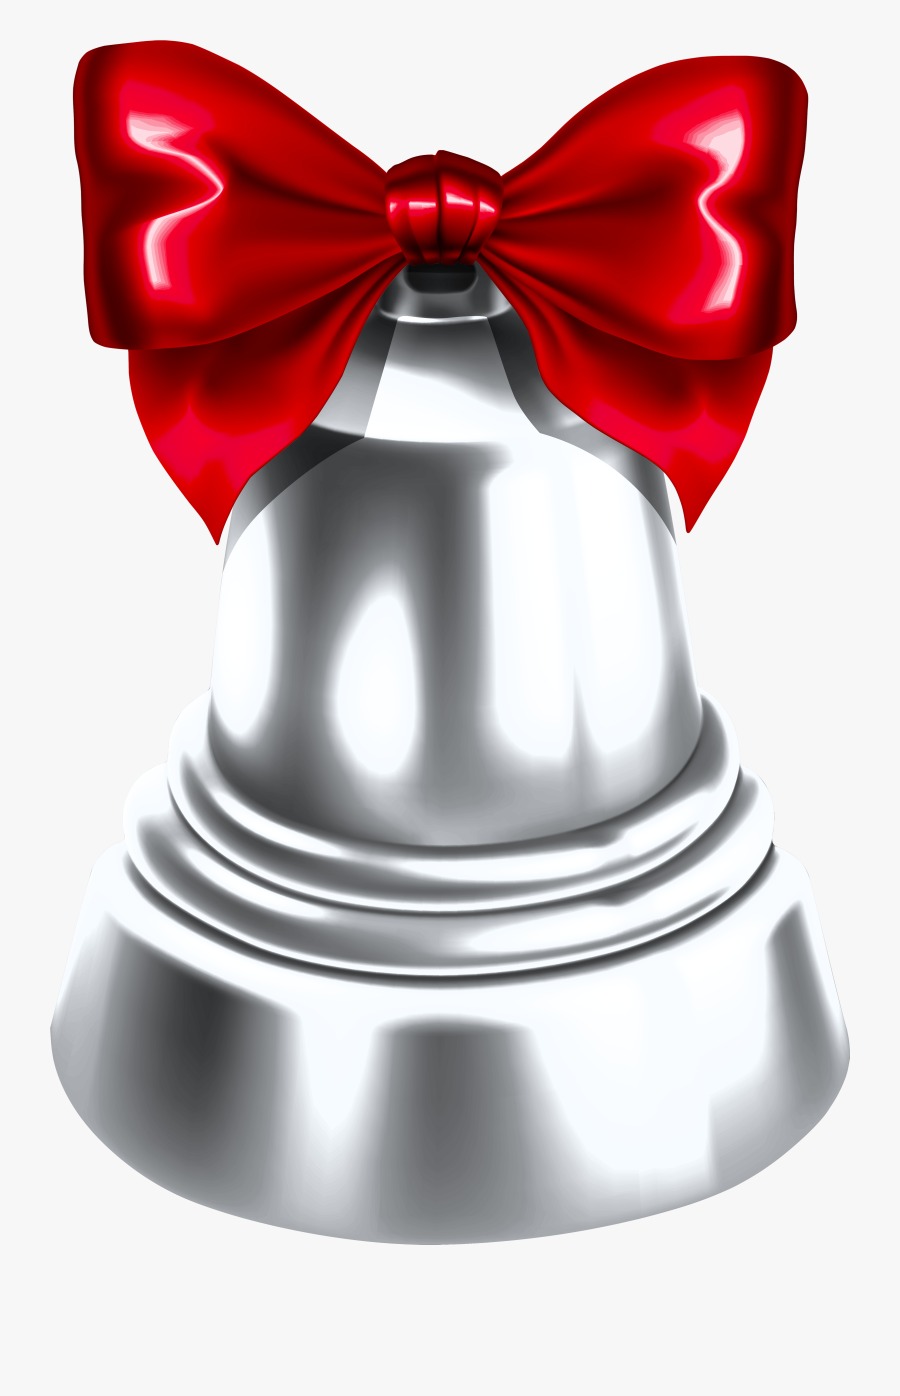 Christmas Silver Bell Png Clipart Image - Silver Christmas Bells Png, Transparent Clipart